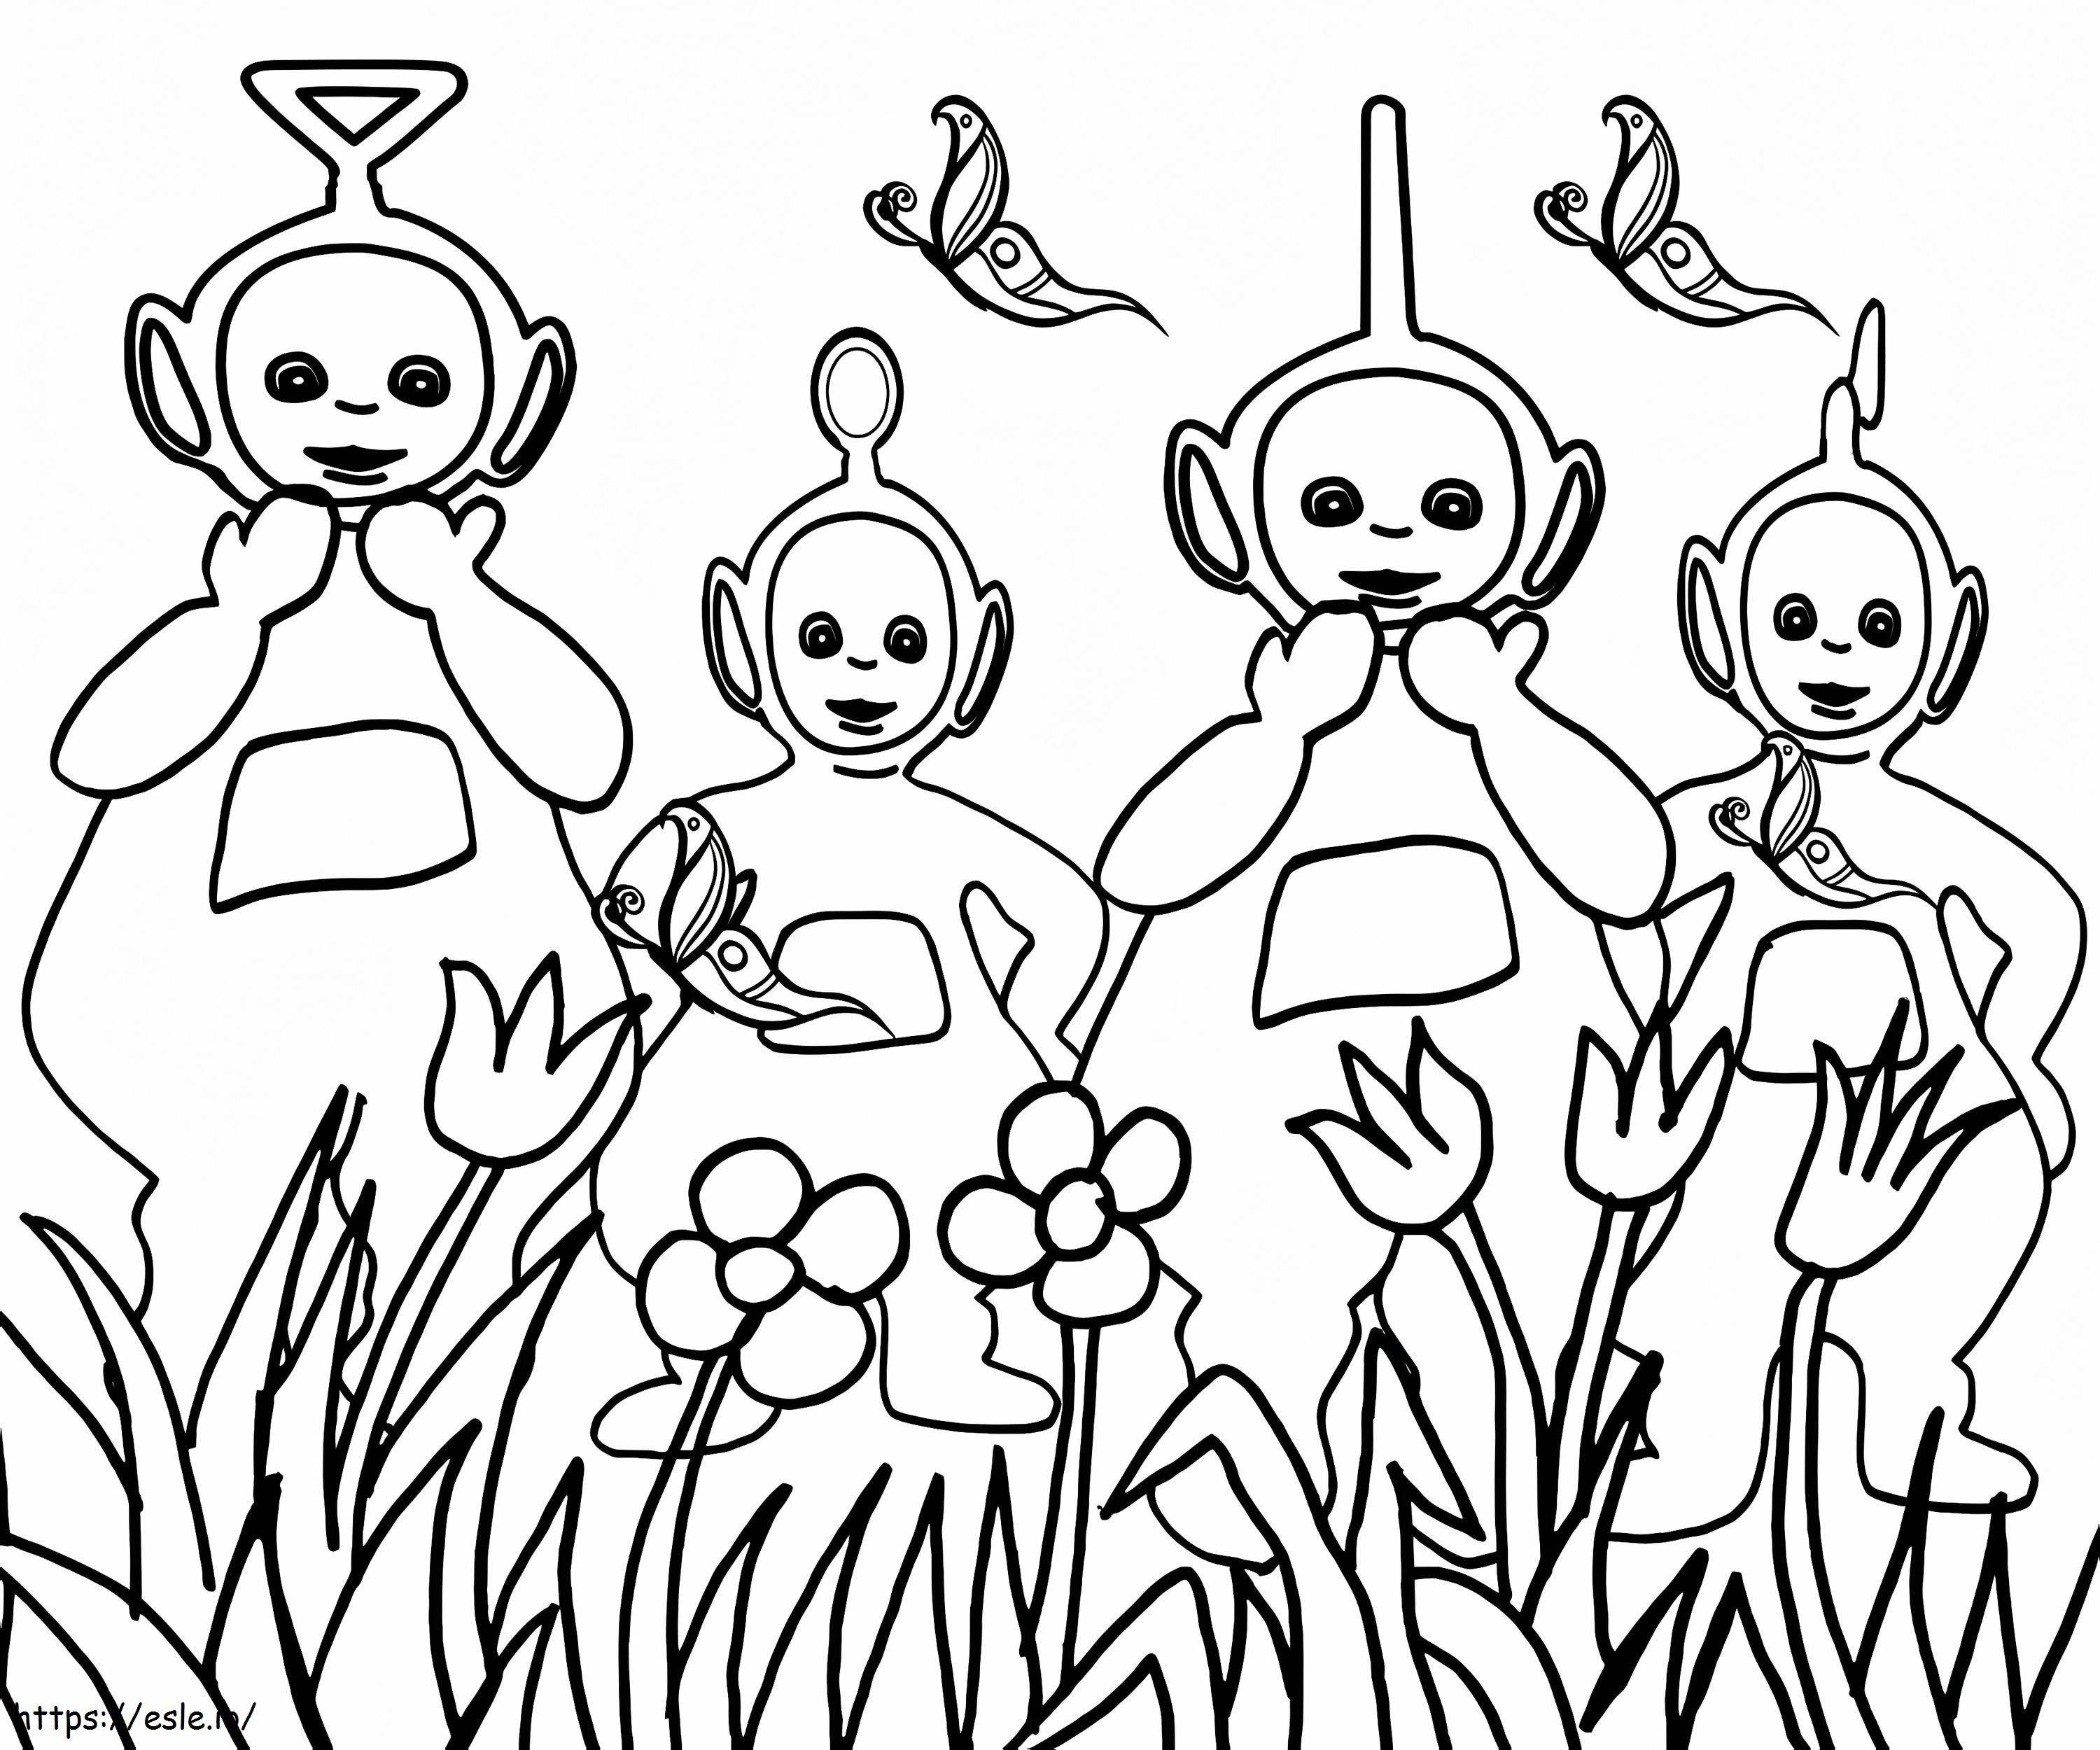 Adorable Teletubbies Coloring Page coloring page